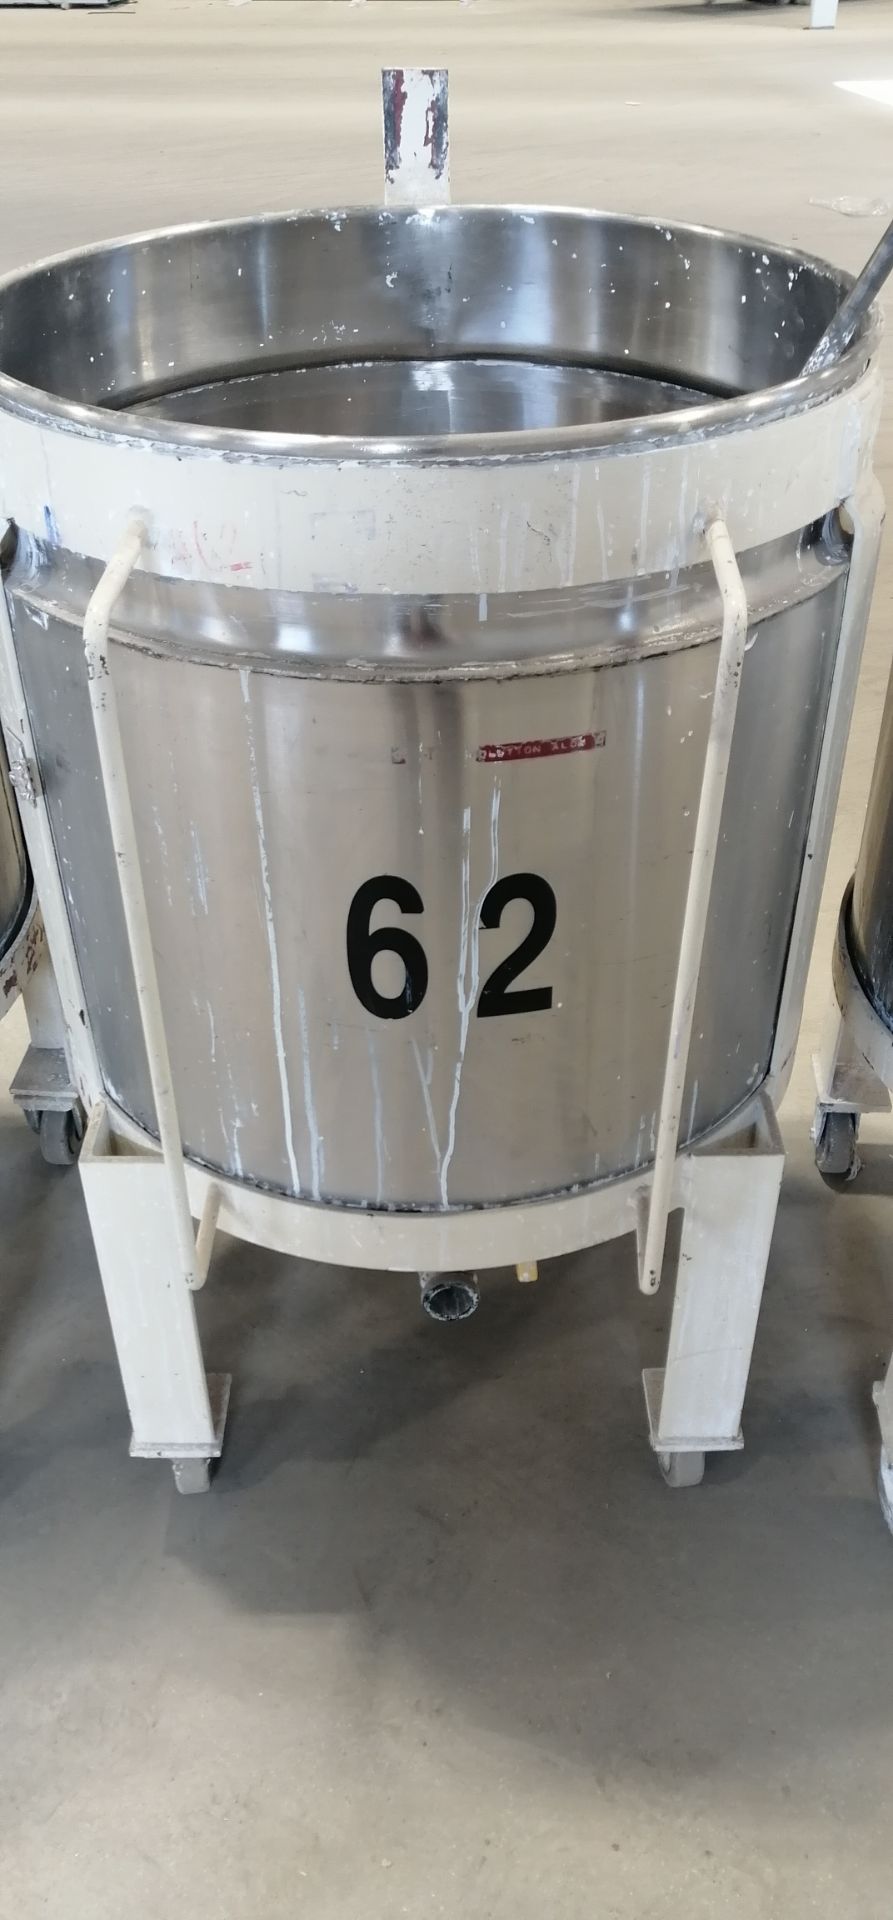 5 stainless steel tank INCLUDED 5 MIXER - Image 11 of 16